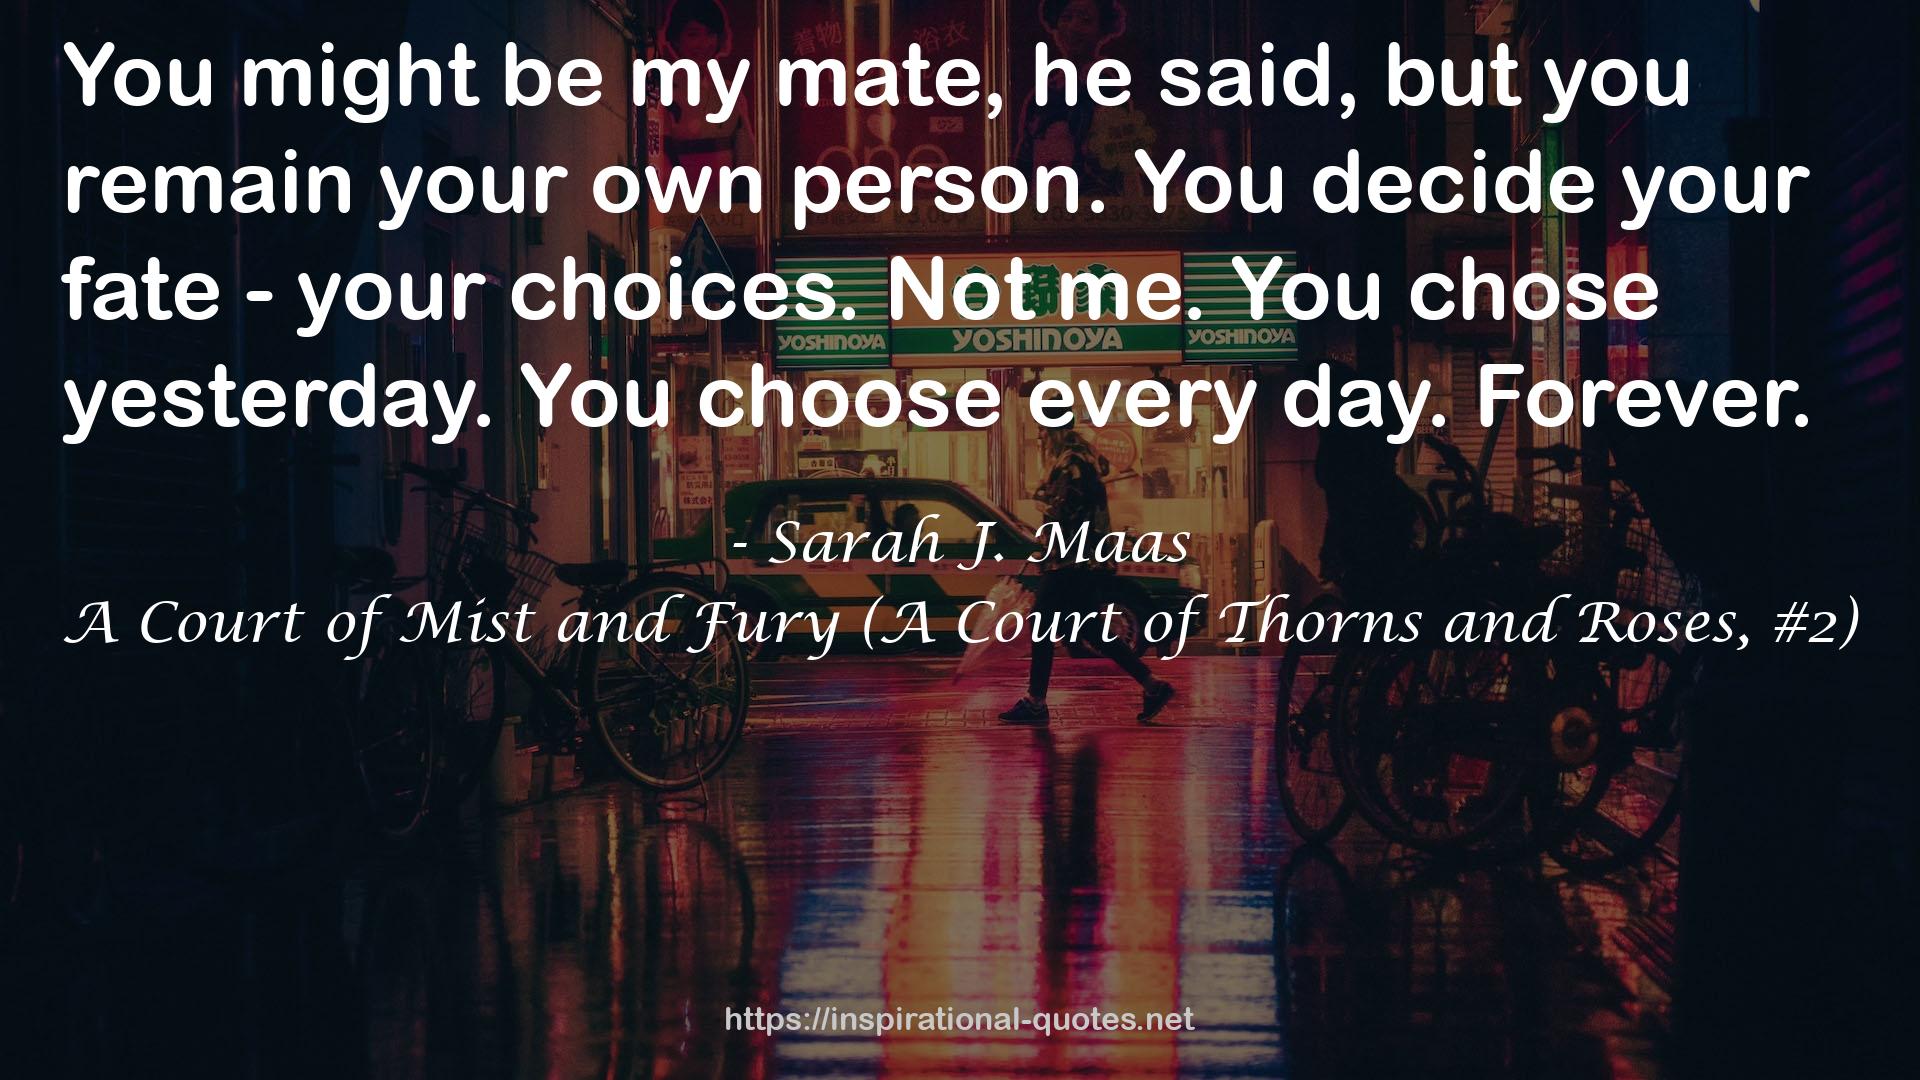 A Court of Mist and Fury (A Court of Thorns and Roses, #2) QUOTES